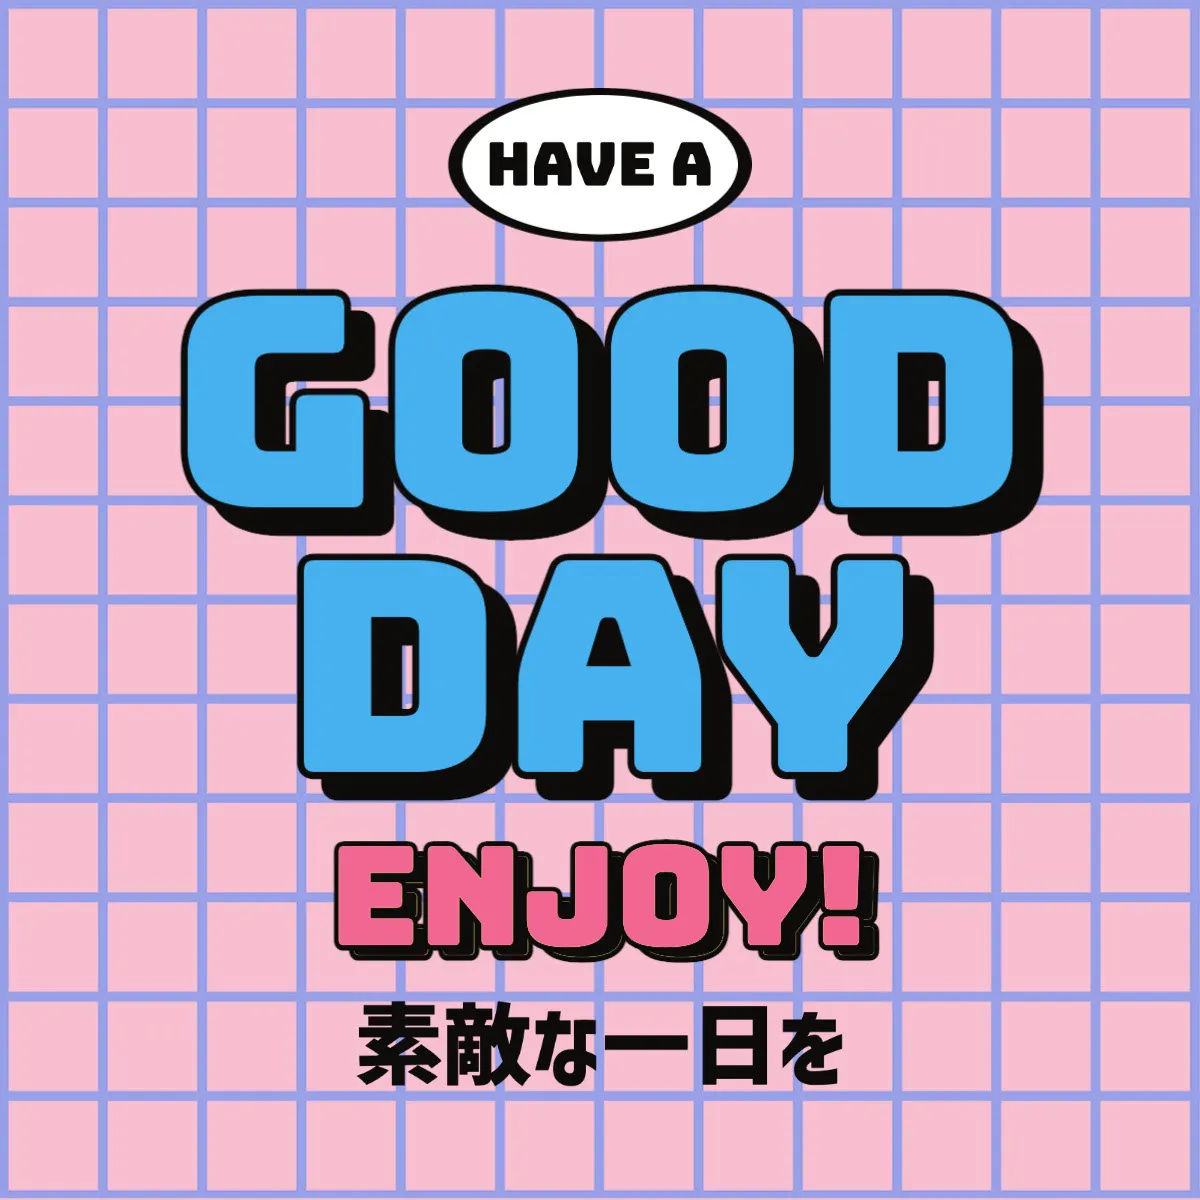 have a good day sticker